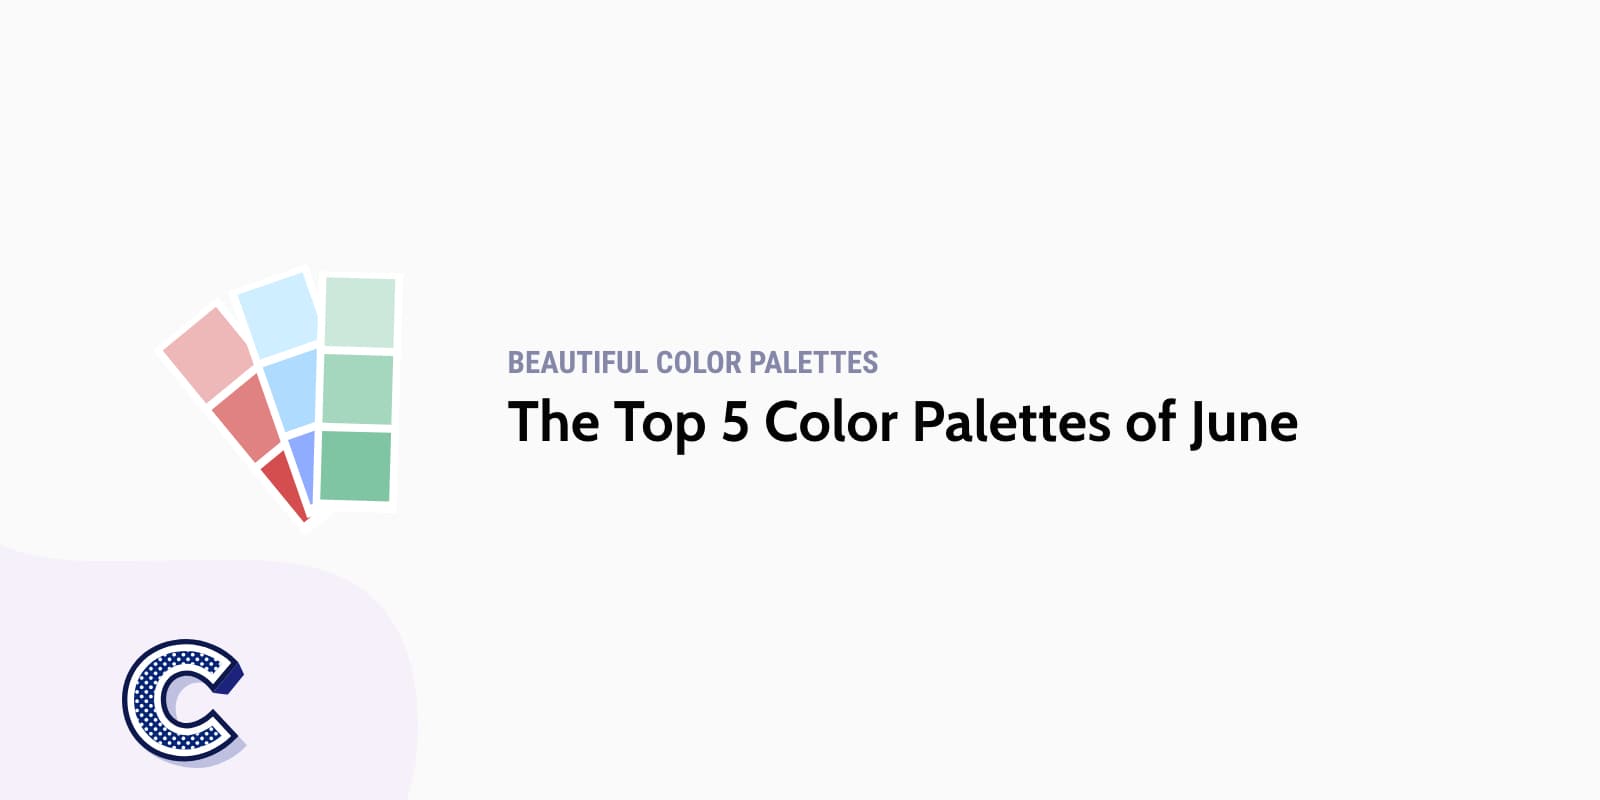 The Top 5 Color Palettes of June